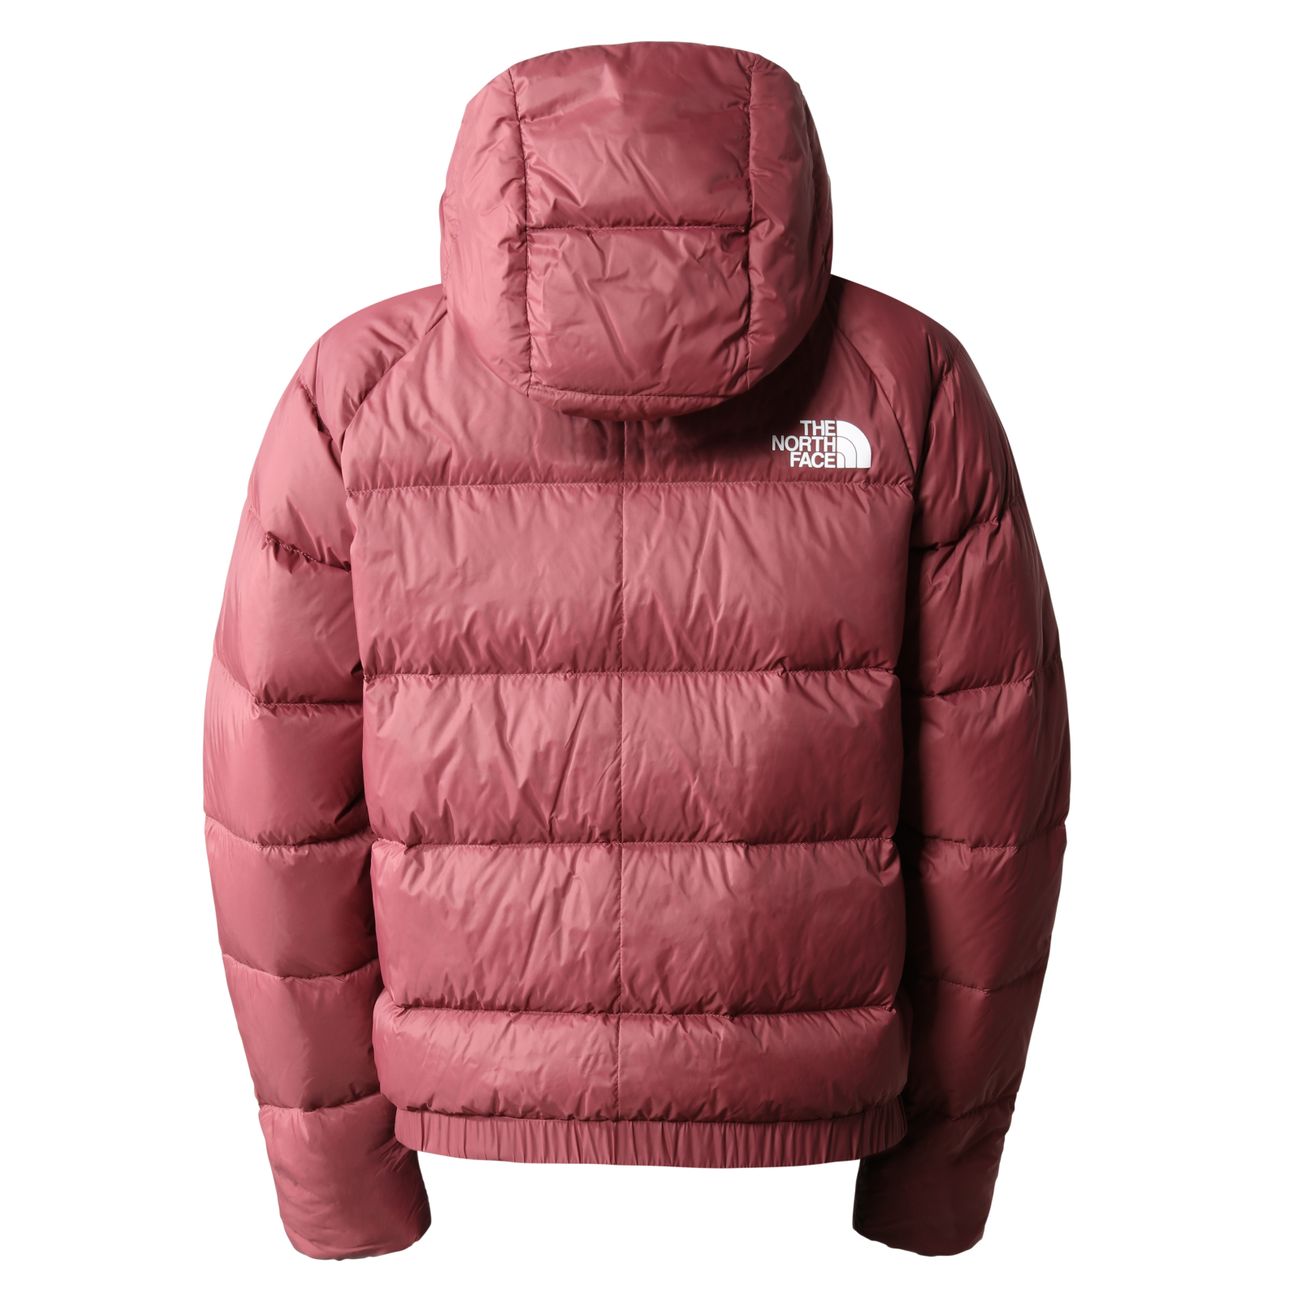 THE NORTH FACE HYALITE DOWN JACKET WITH HOOD Damen Winterjacke - The North Face - SAGATOO - 196247219333